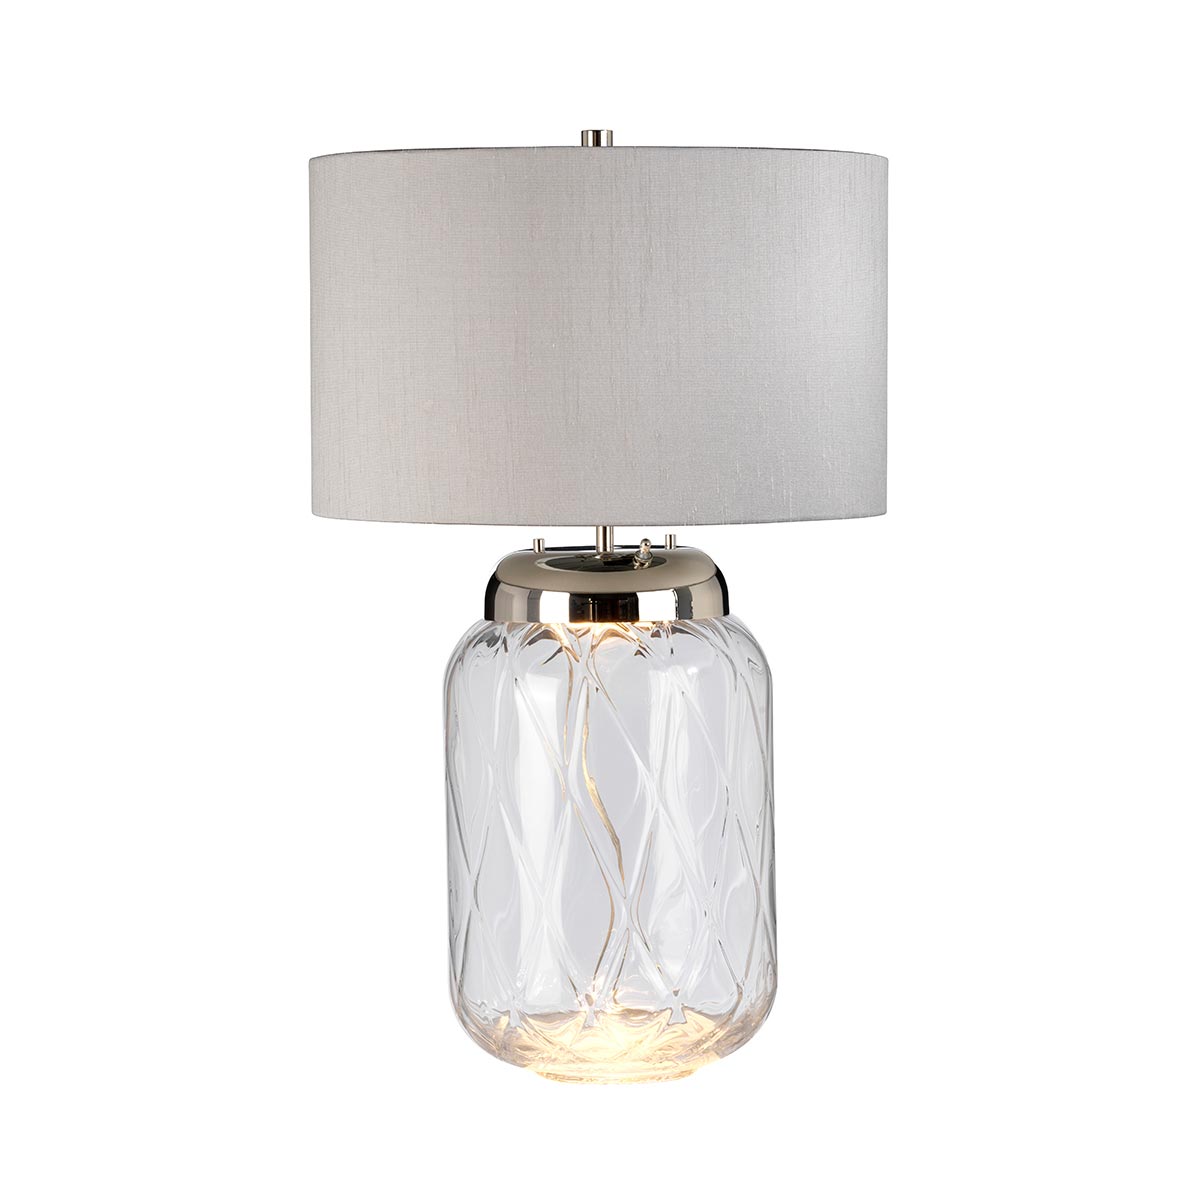 Sola 2 Light Clear Glass Table Lamp Polished Nickel Silver Drum Shade